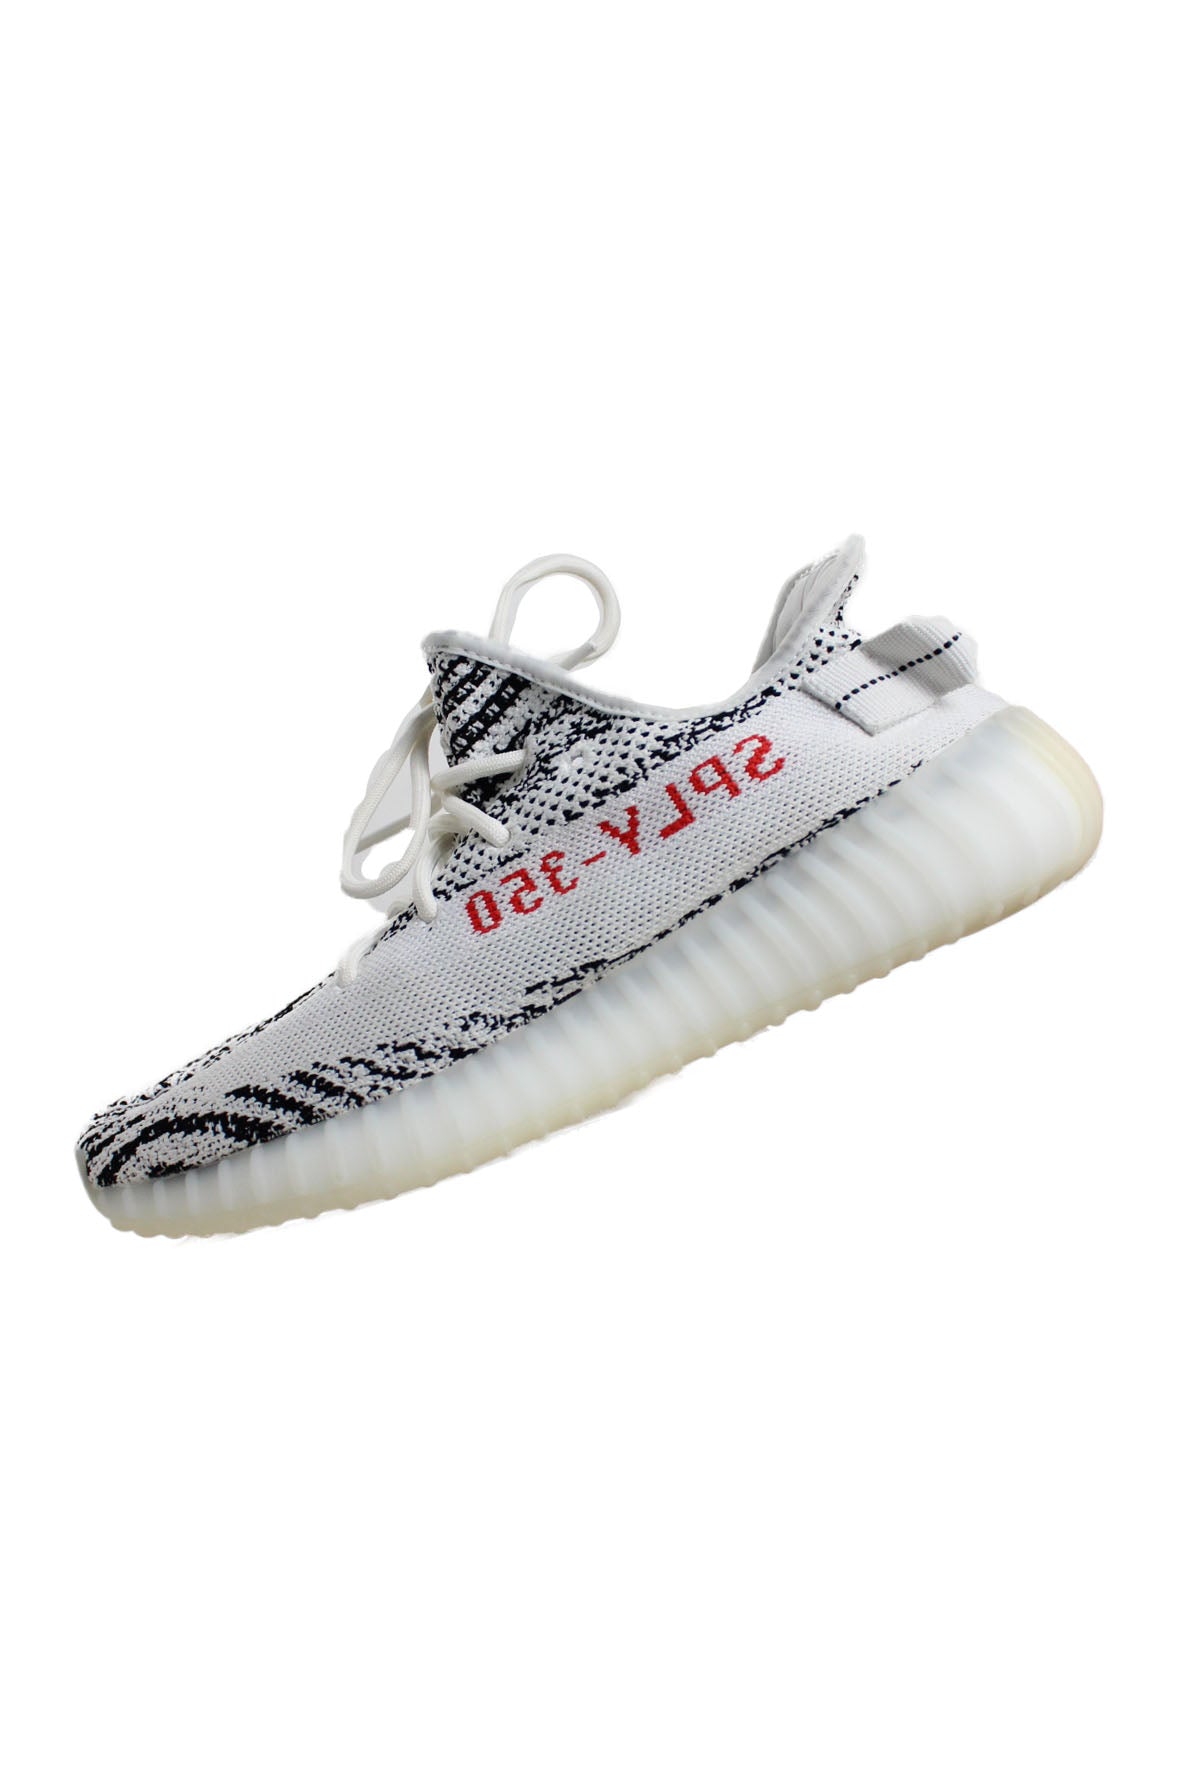 side view of adidas white/black/red ‘yeezy boost 350 v2 zebra’ shoes. features ‘350-ylps’ at uppers sides, top round lace closure, and chunky rubber sole.